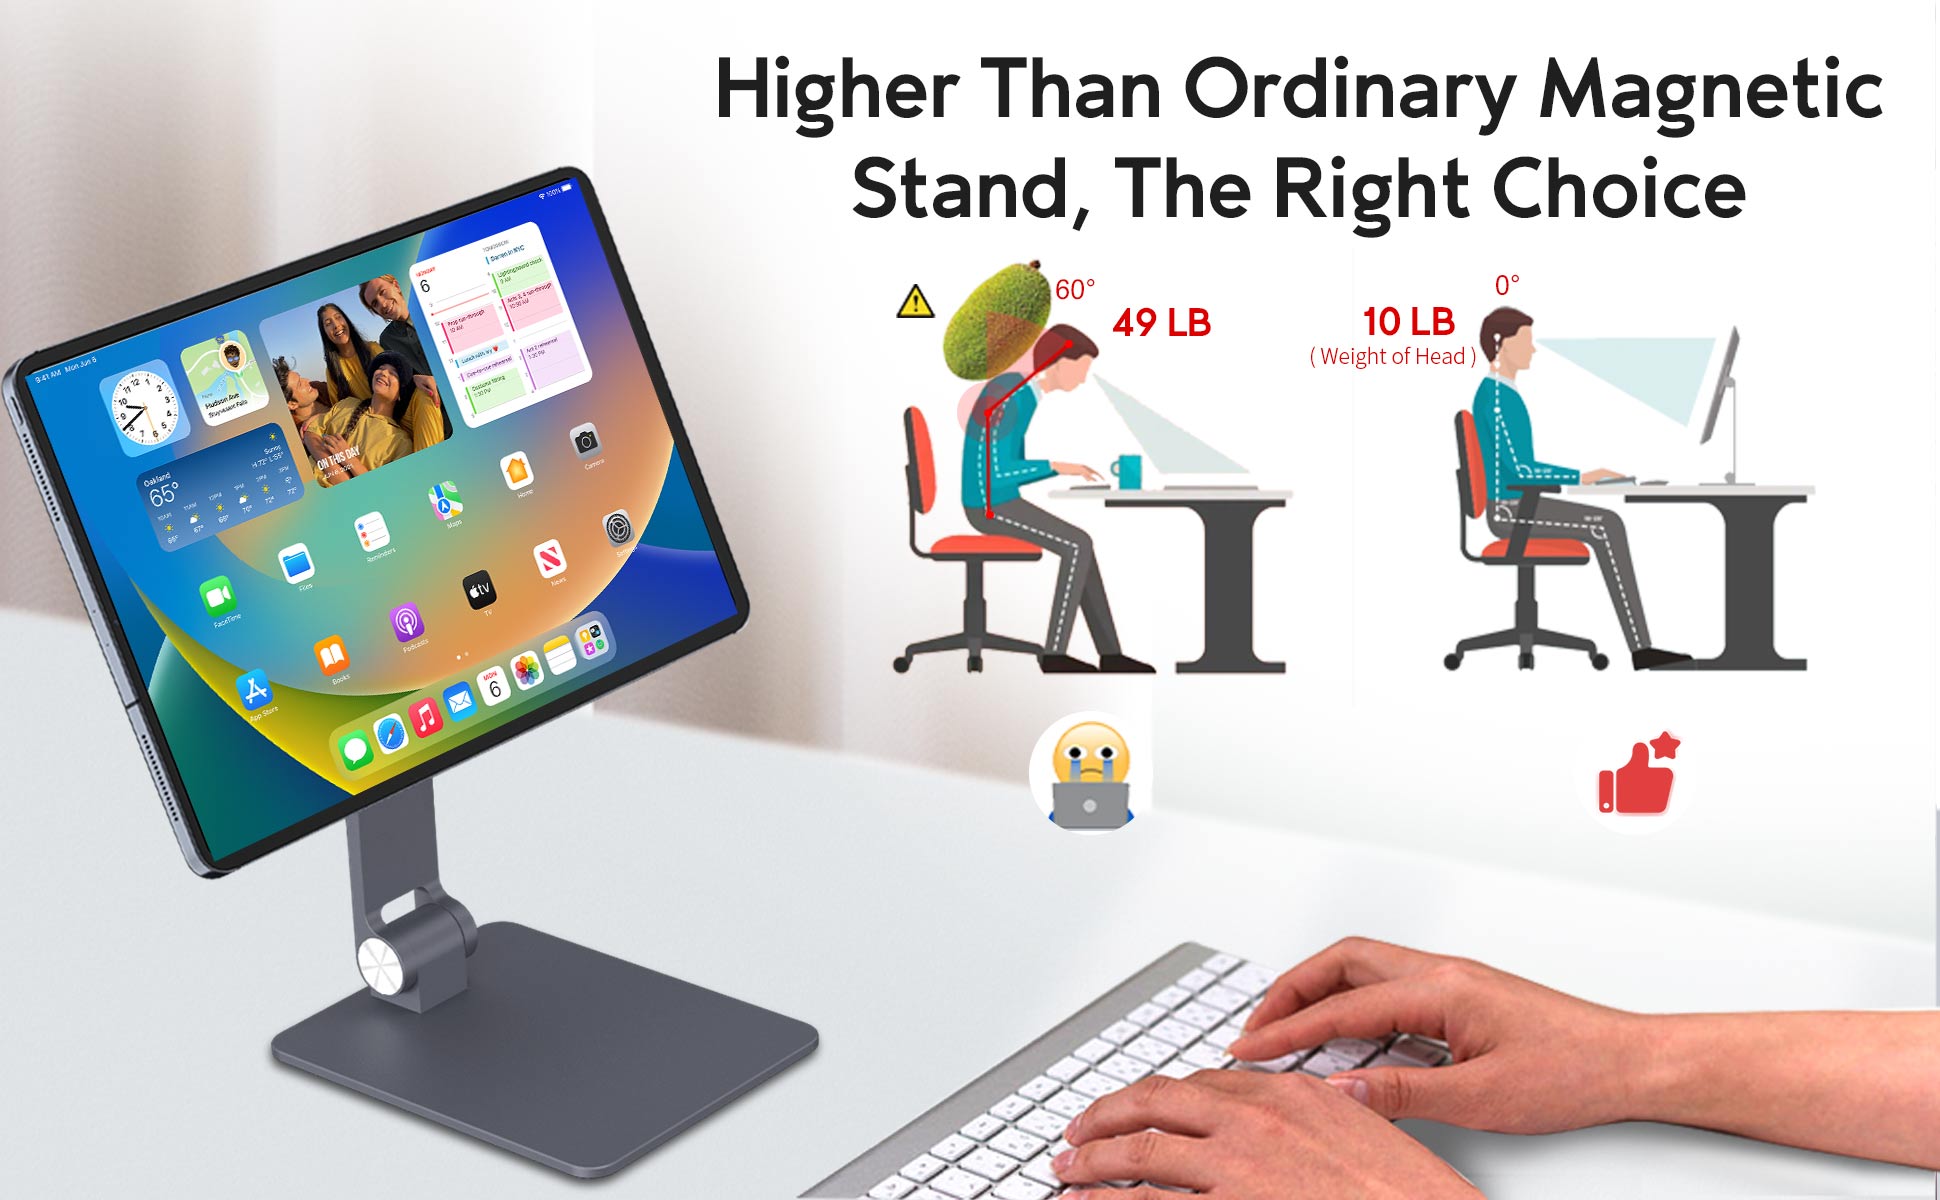 the-highest-ipad-magnetic-stand-designed-for-adults-more-scientific-ergonomic-height